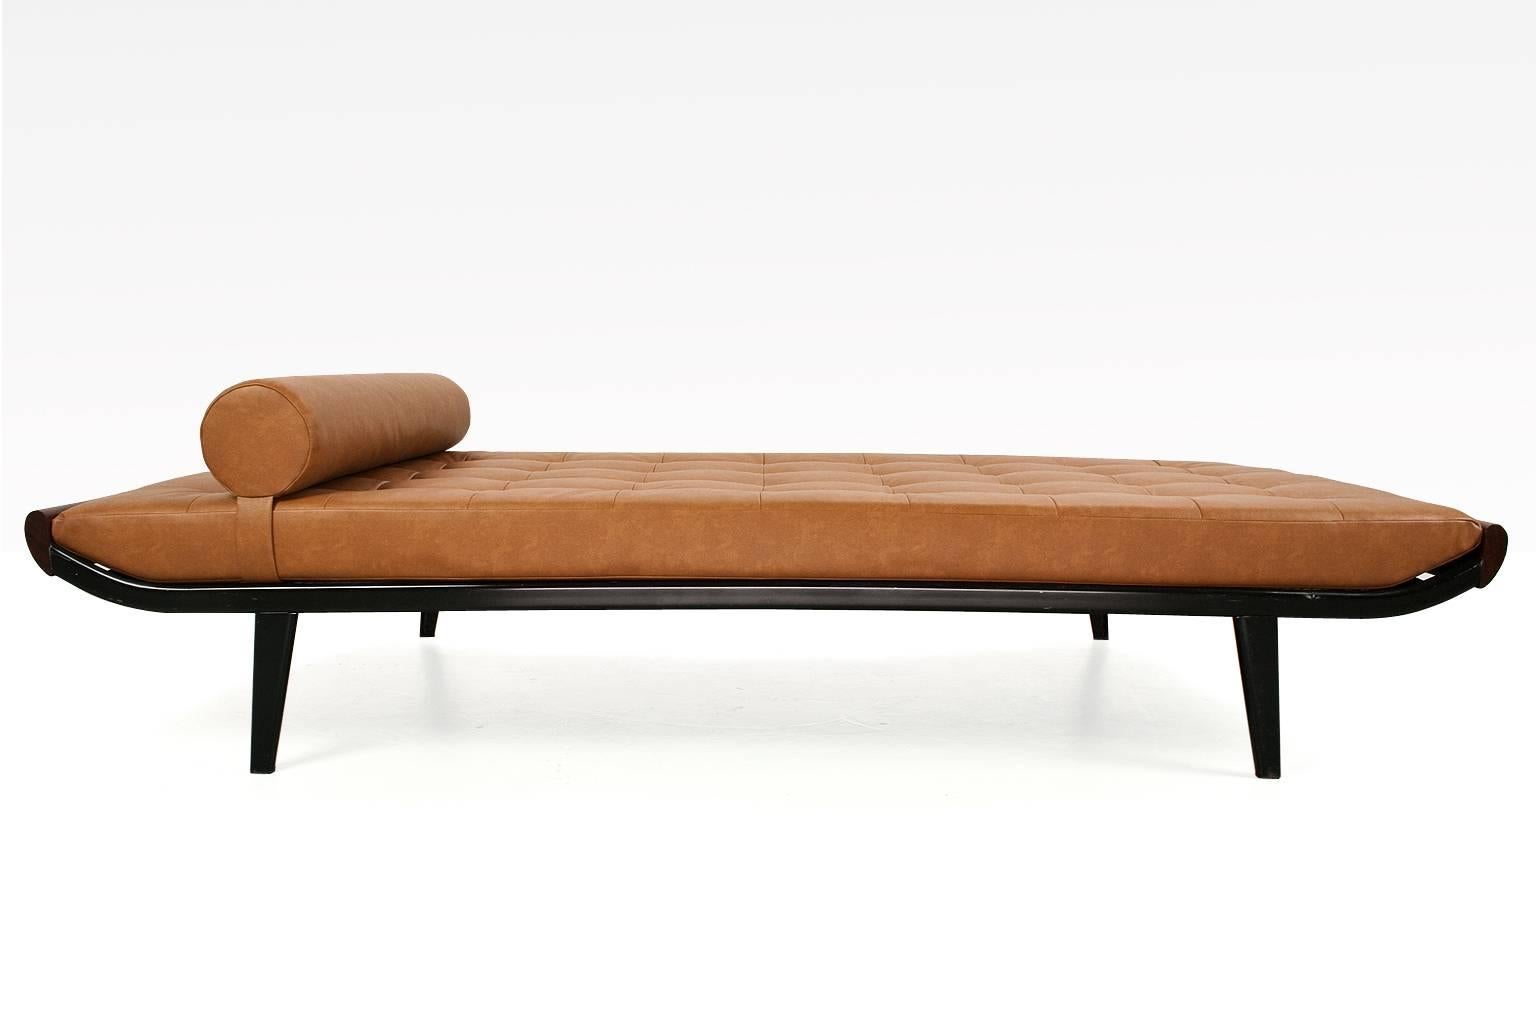 Mid-Century Modern Dutch daybed new upholstered in an excellent quality brown or cognac coloured faux leather padded upholstery, on new double layered foam fillings. The springs are in excellent condition. This piece is re-upholstered with